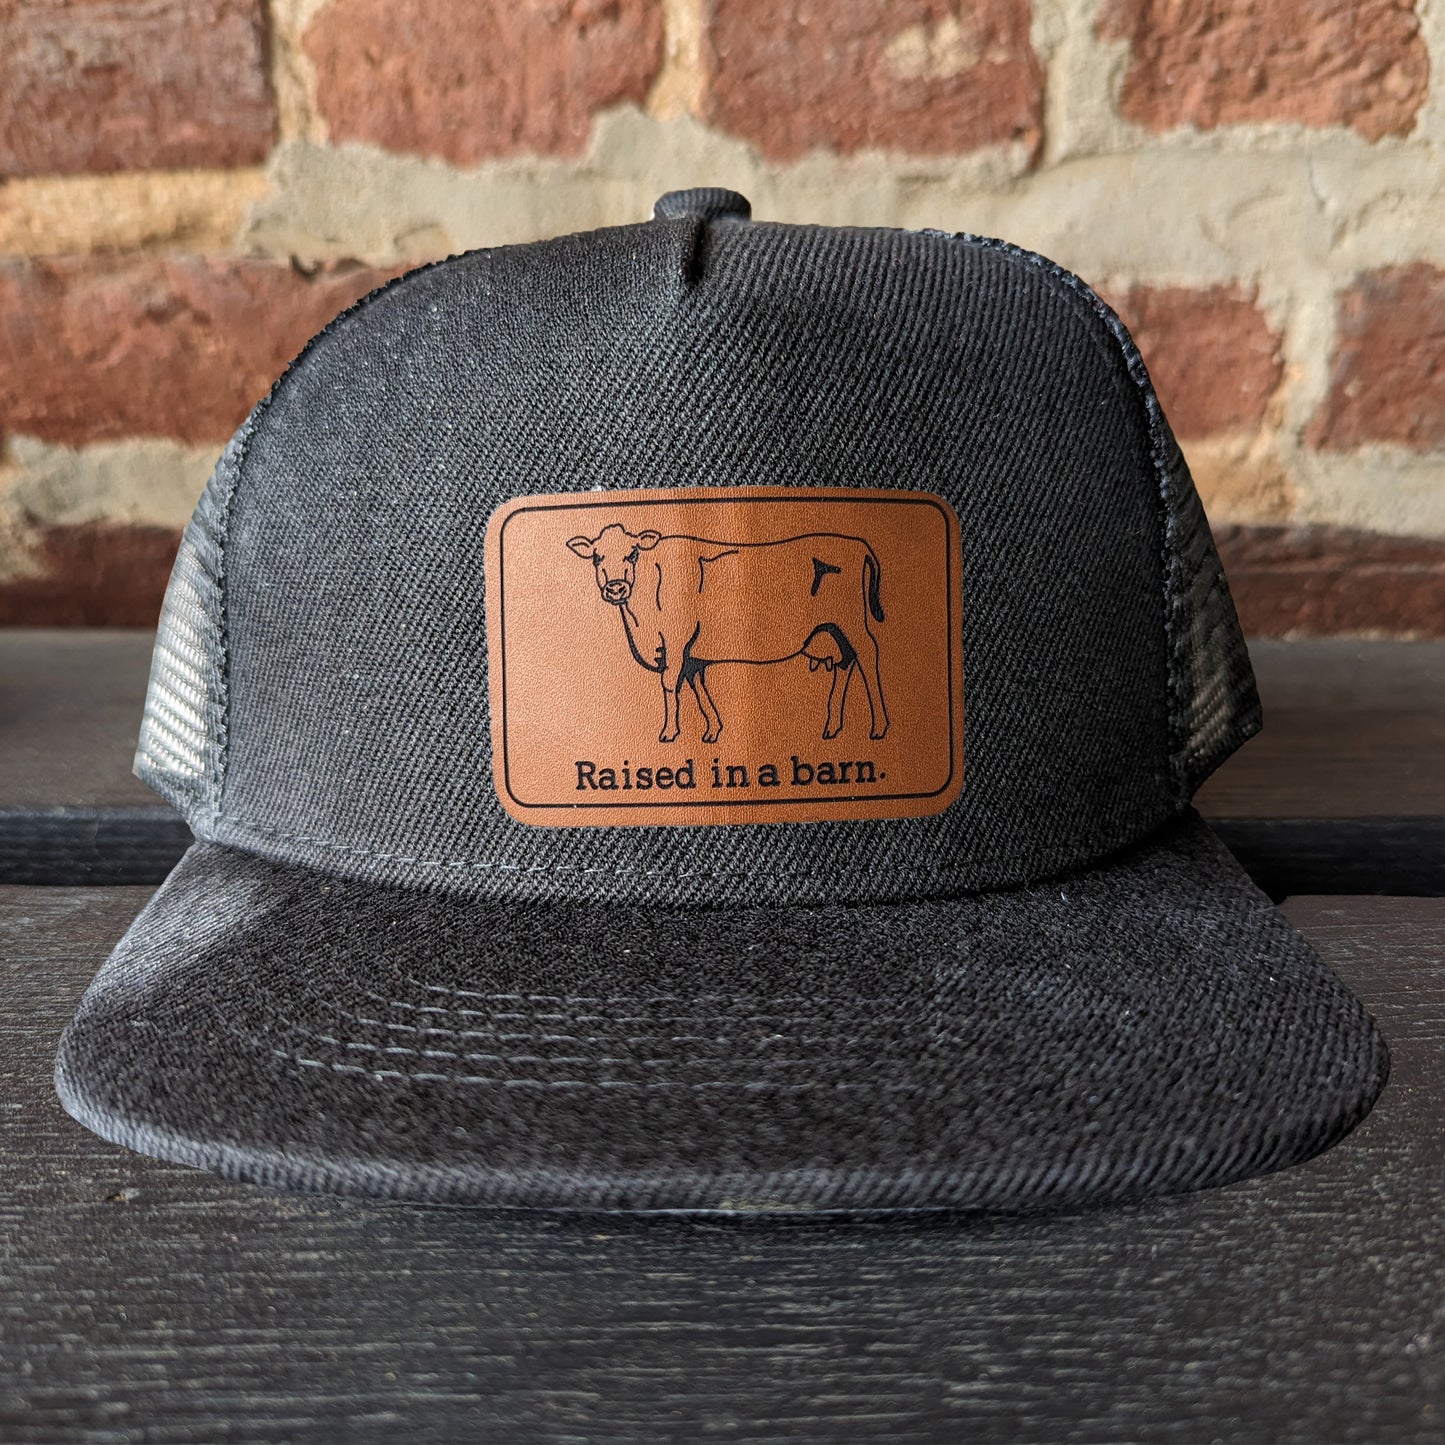 "Raised in a barn Cow" Mesh Back Trucker Hat | Youth Size | FOUR Color Options